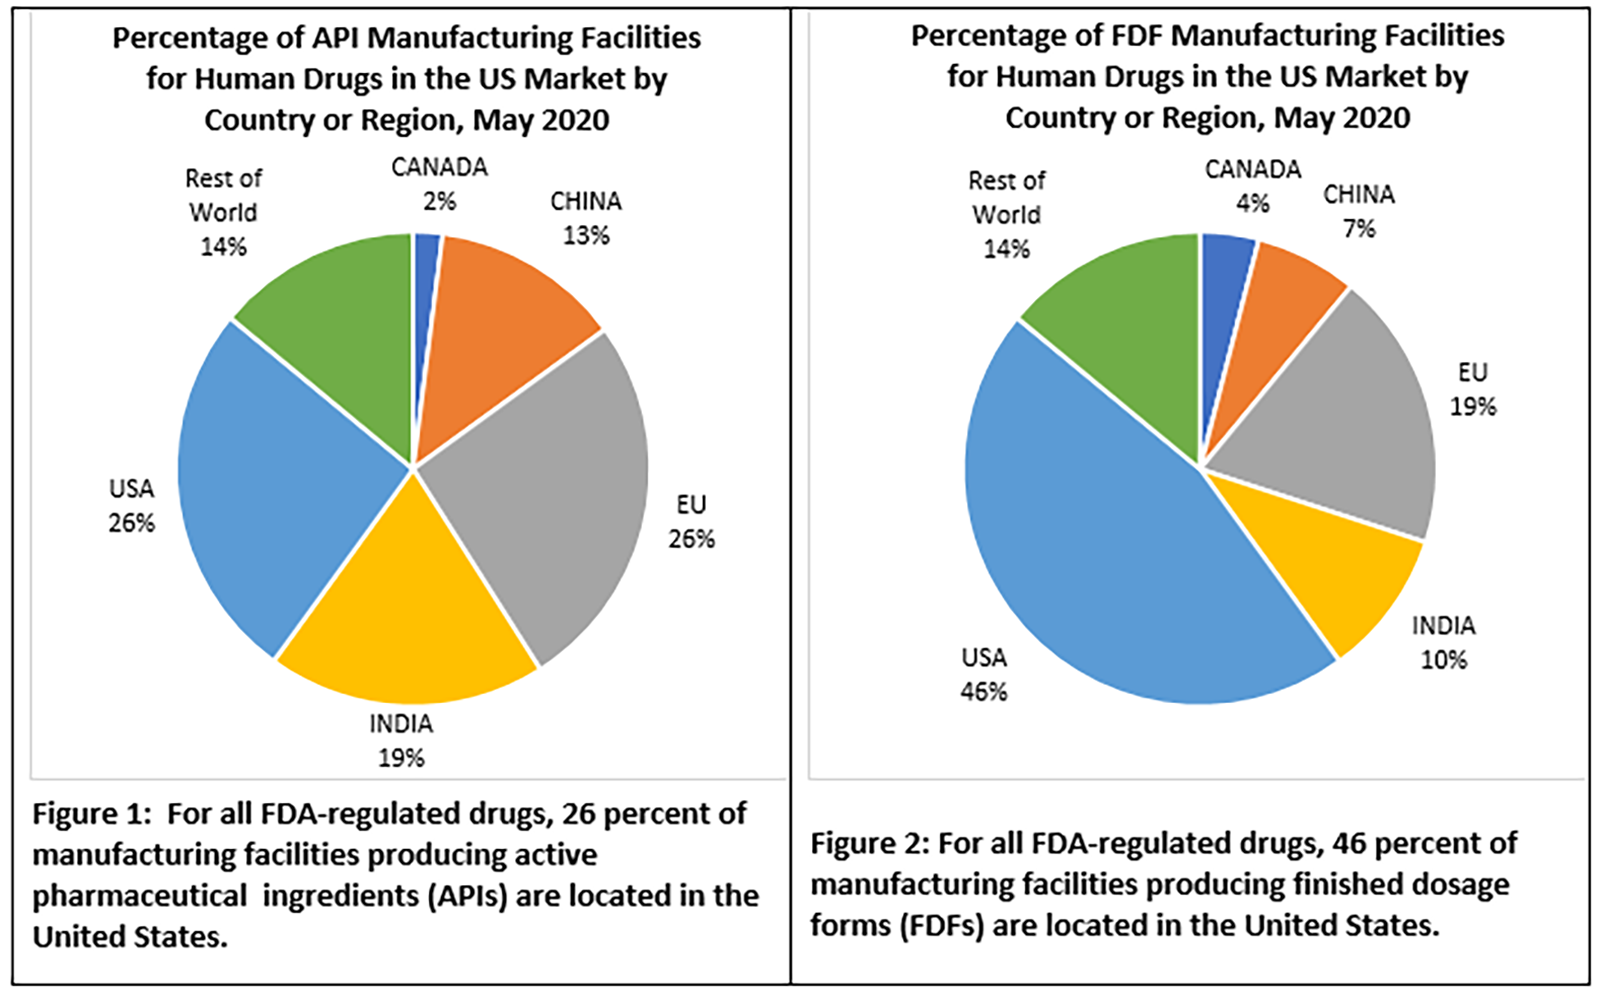 Figures 1 and 2: For all FDA-regulated drugs, 26 percent of manufacturing facilities producing active pharmaceutical ingredients (APIs) and 46 percent of manufacturing facilities producing finished dosage forms (FDFs) are located in the U.S. 